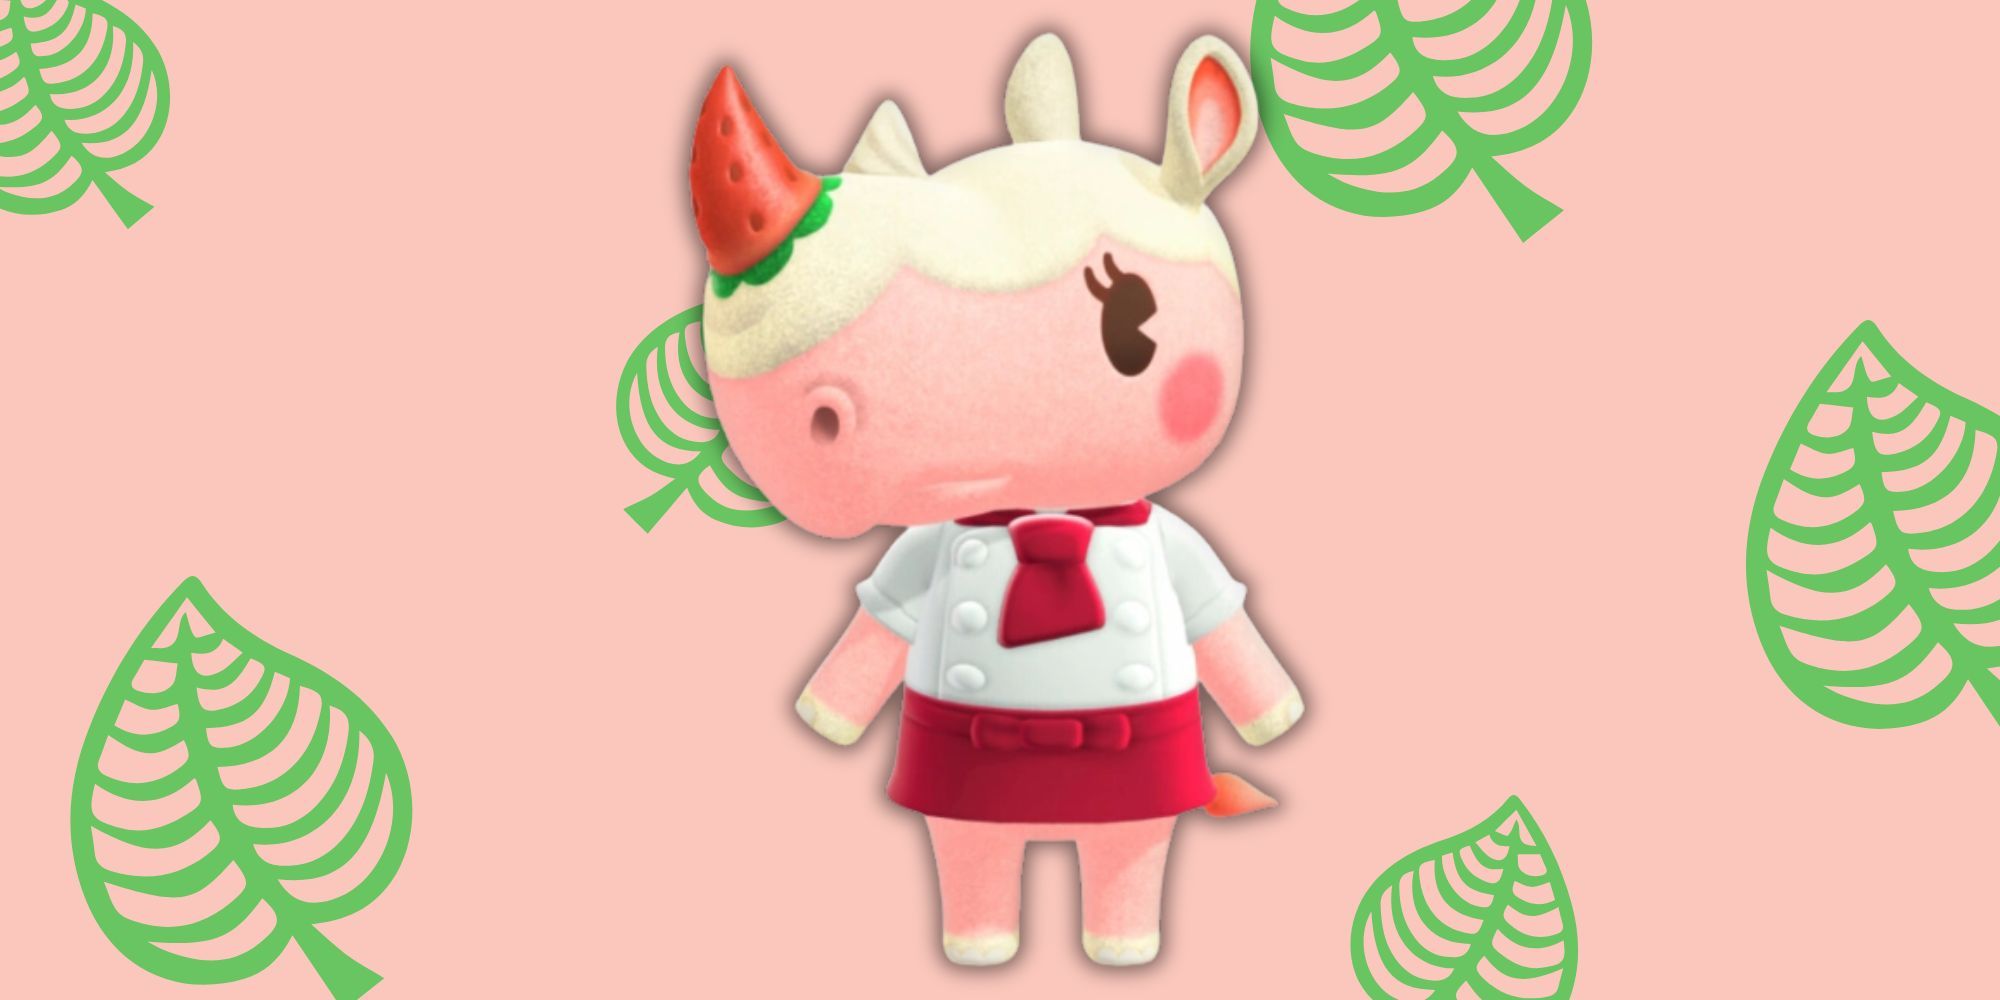 Merengue from Animal Crossing in front of leaf-patterned backdrop